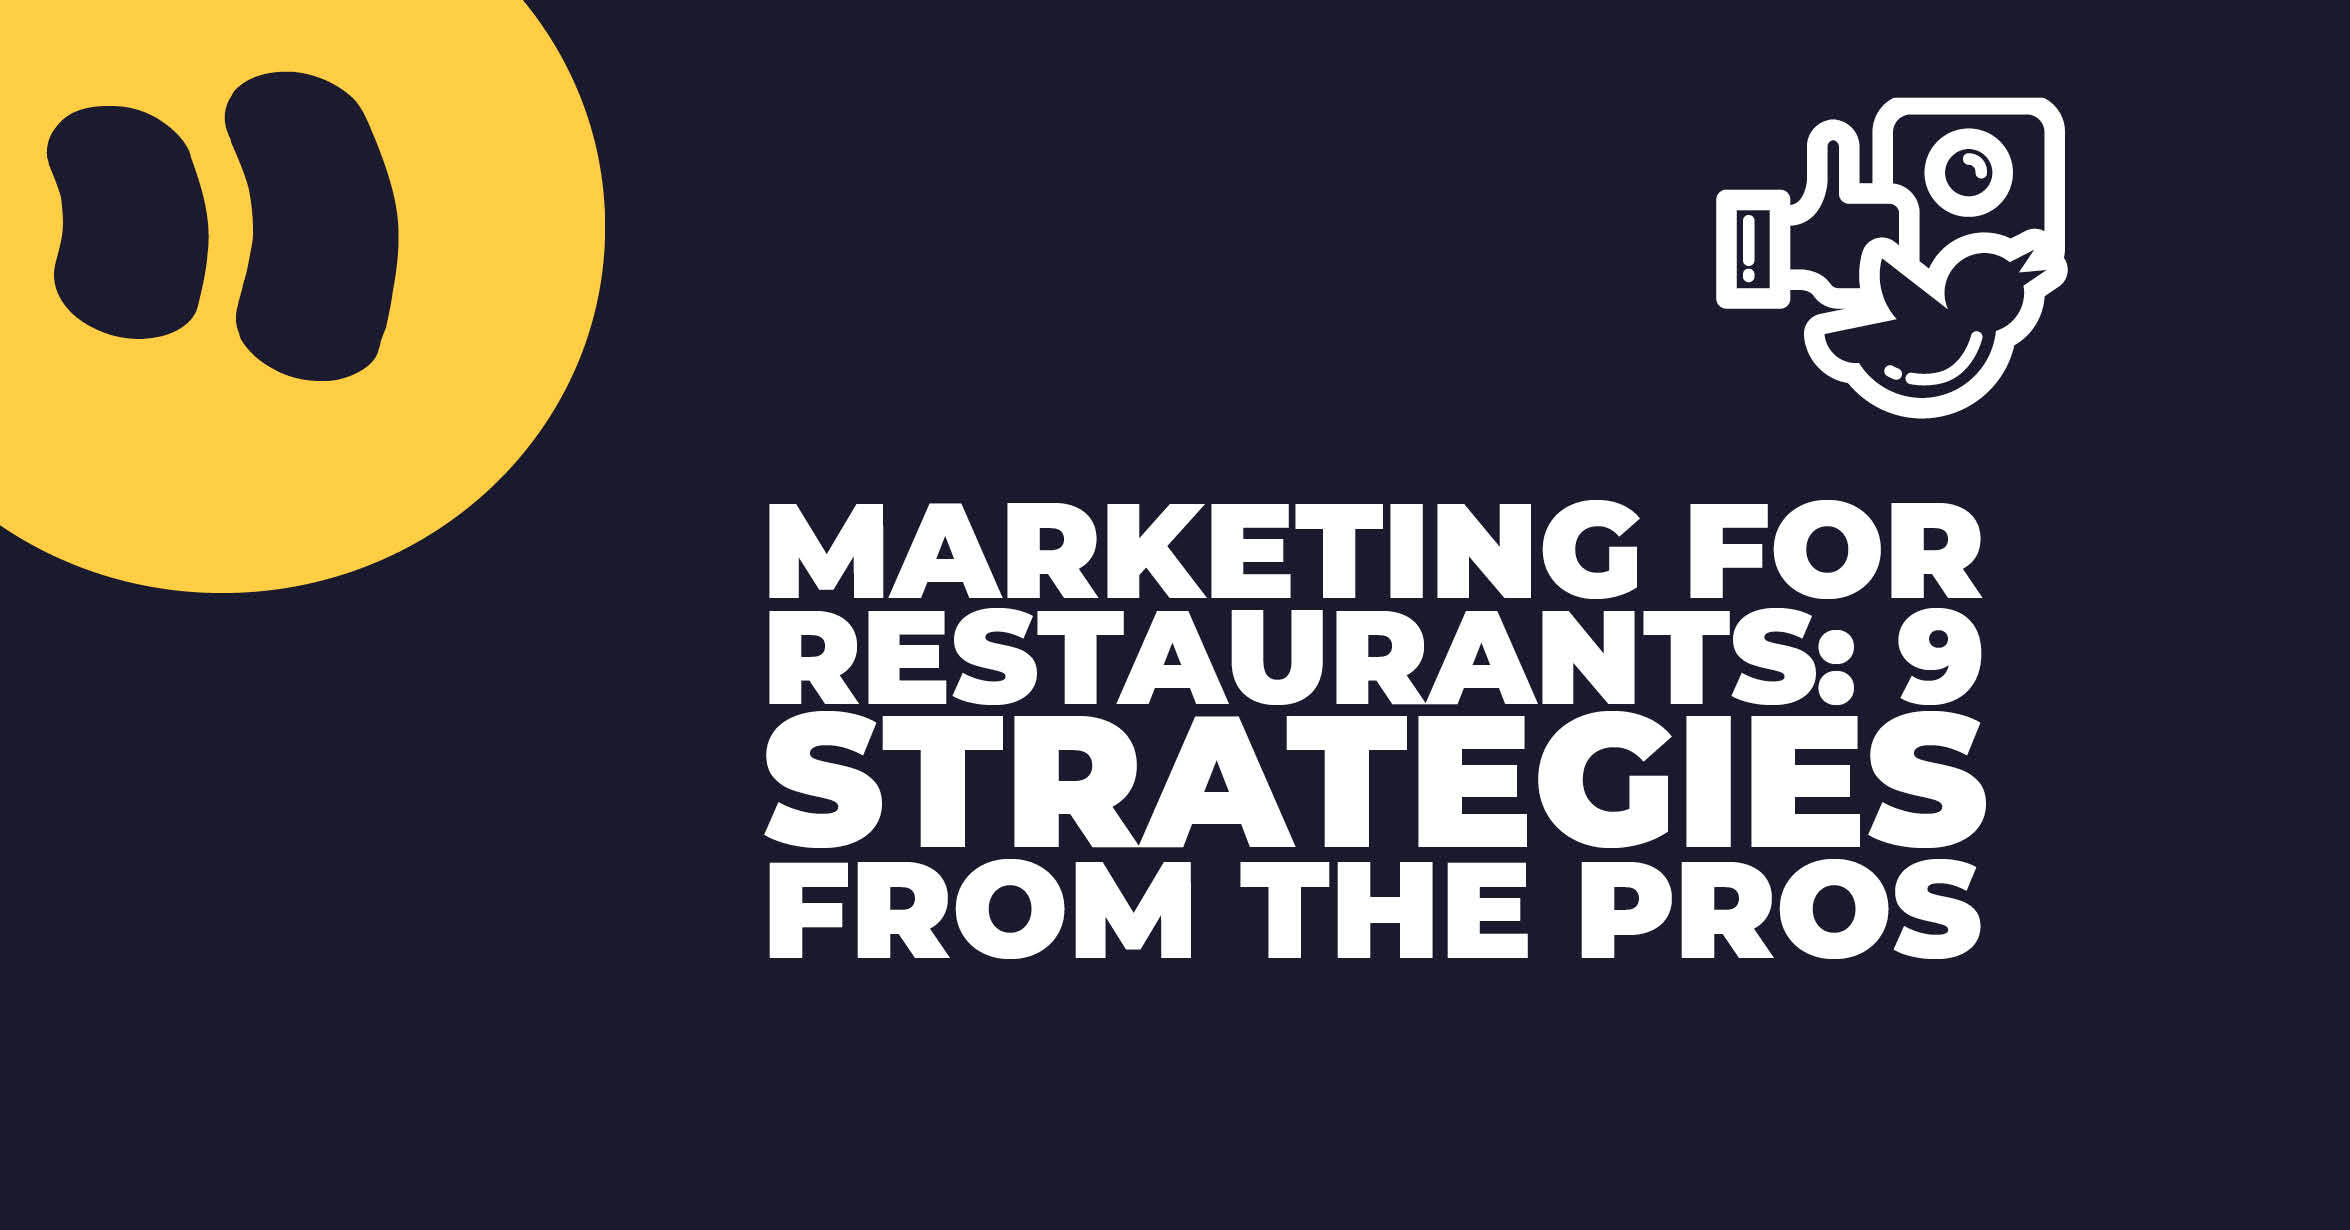 Marketing for Restaurants: 4 Strategies the Pros Use